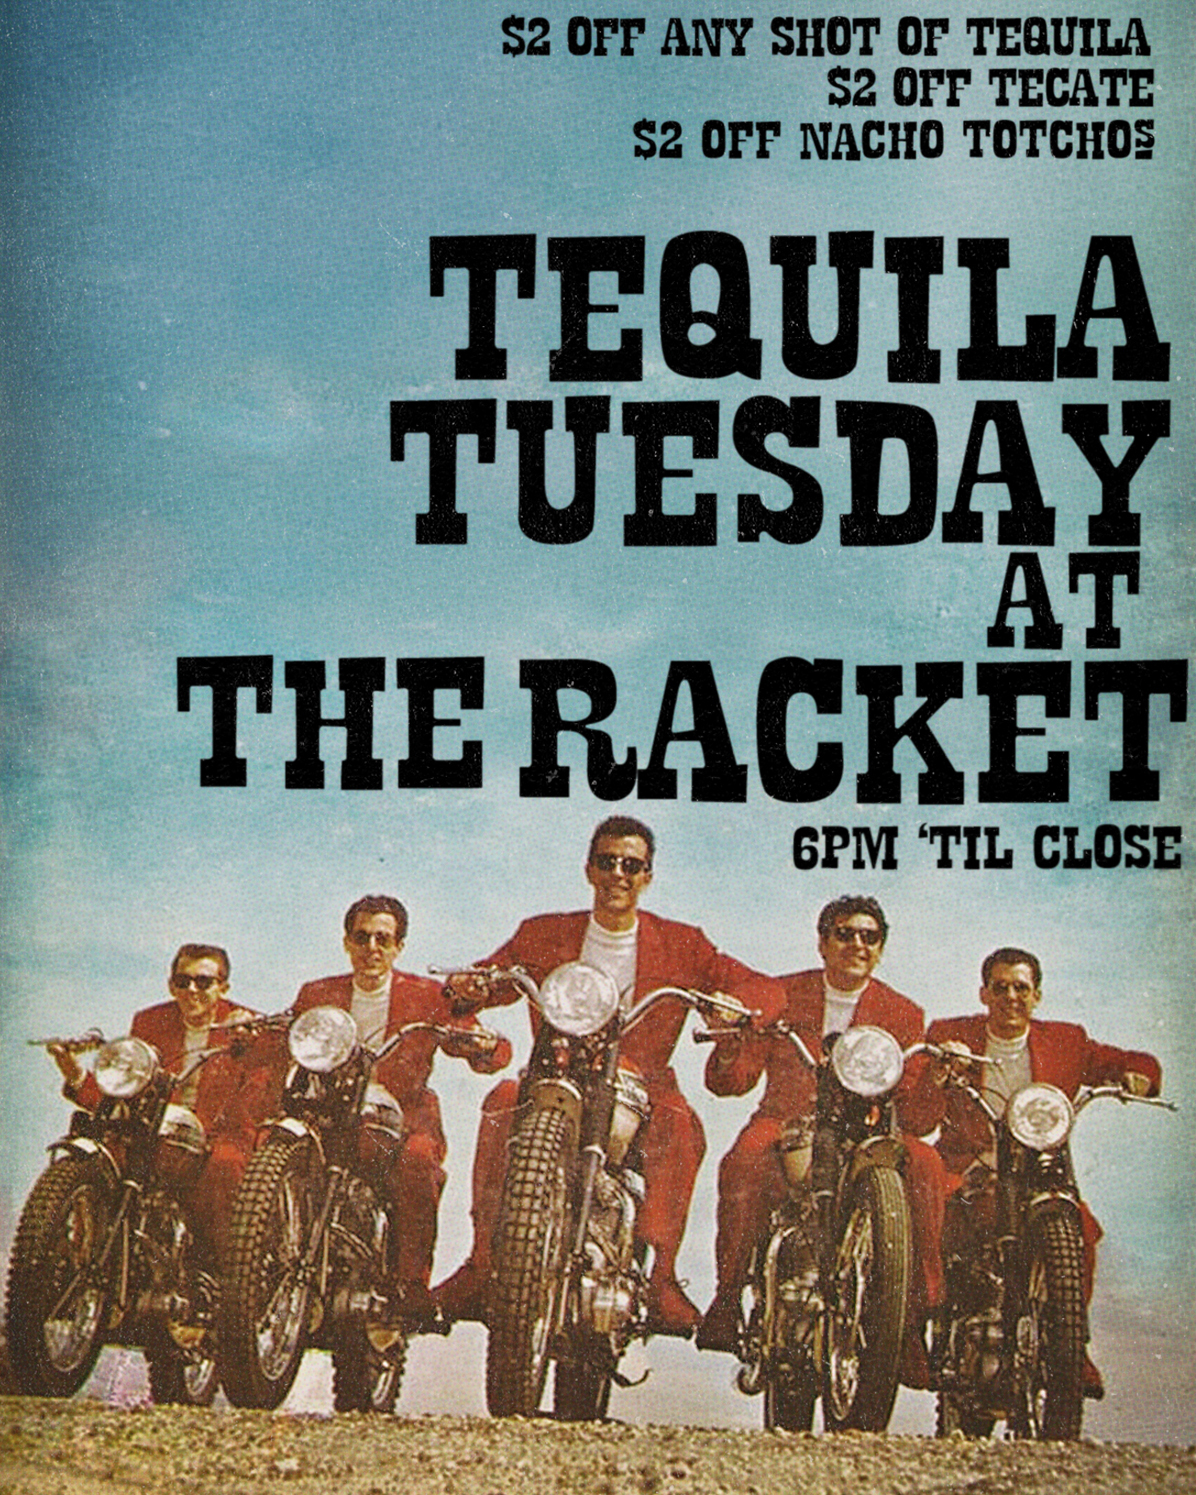 Tequila Tuesday at the Racket